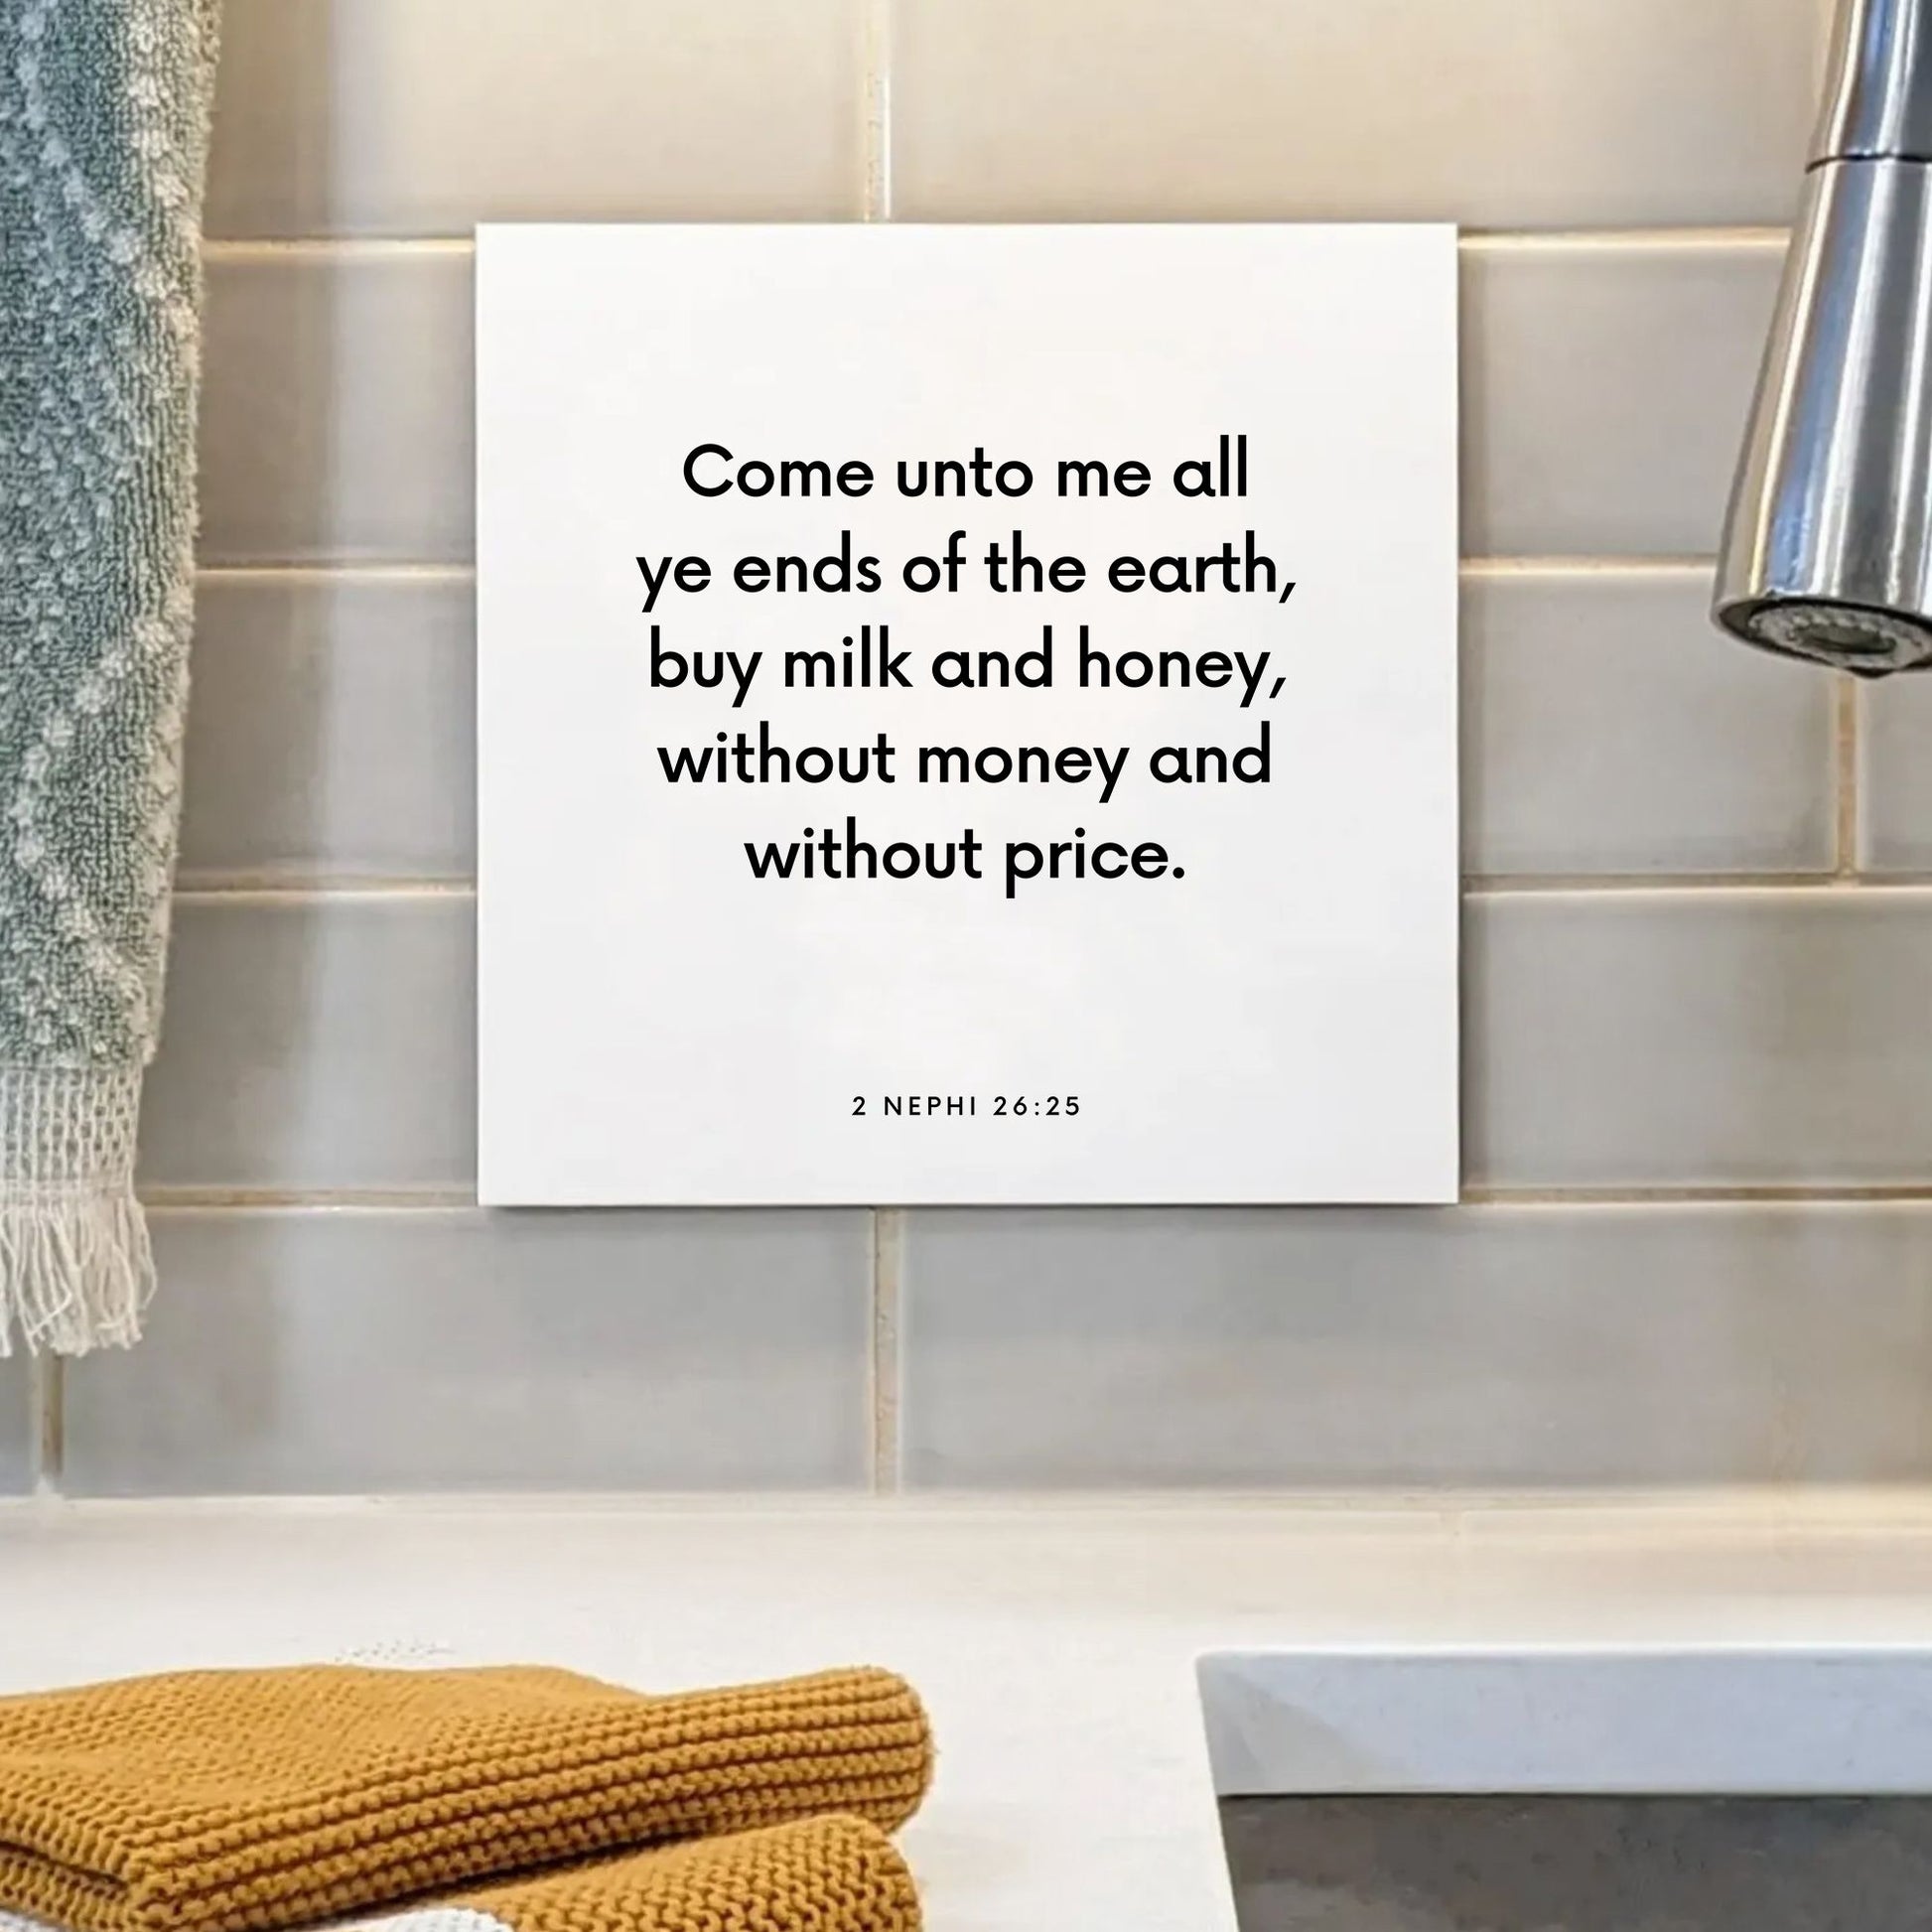 Sink mouting of the scripture tile for 2 Nephi 26:25 - "Buy milk and honey, without money and without price"